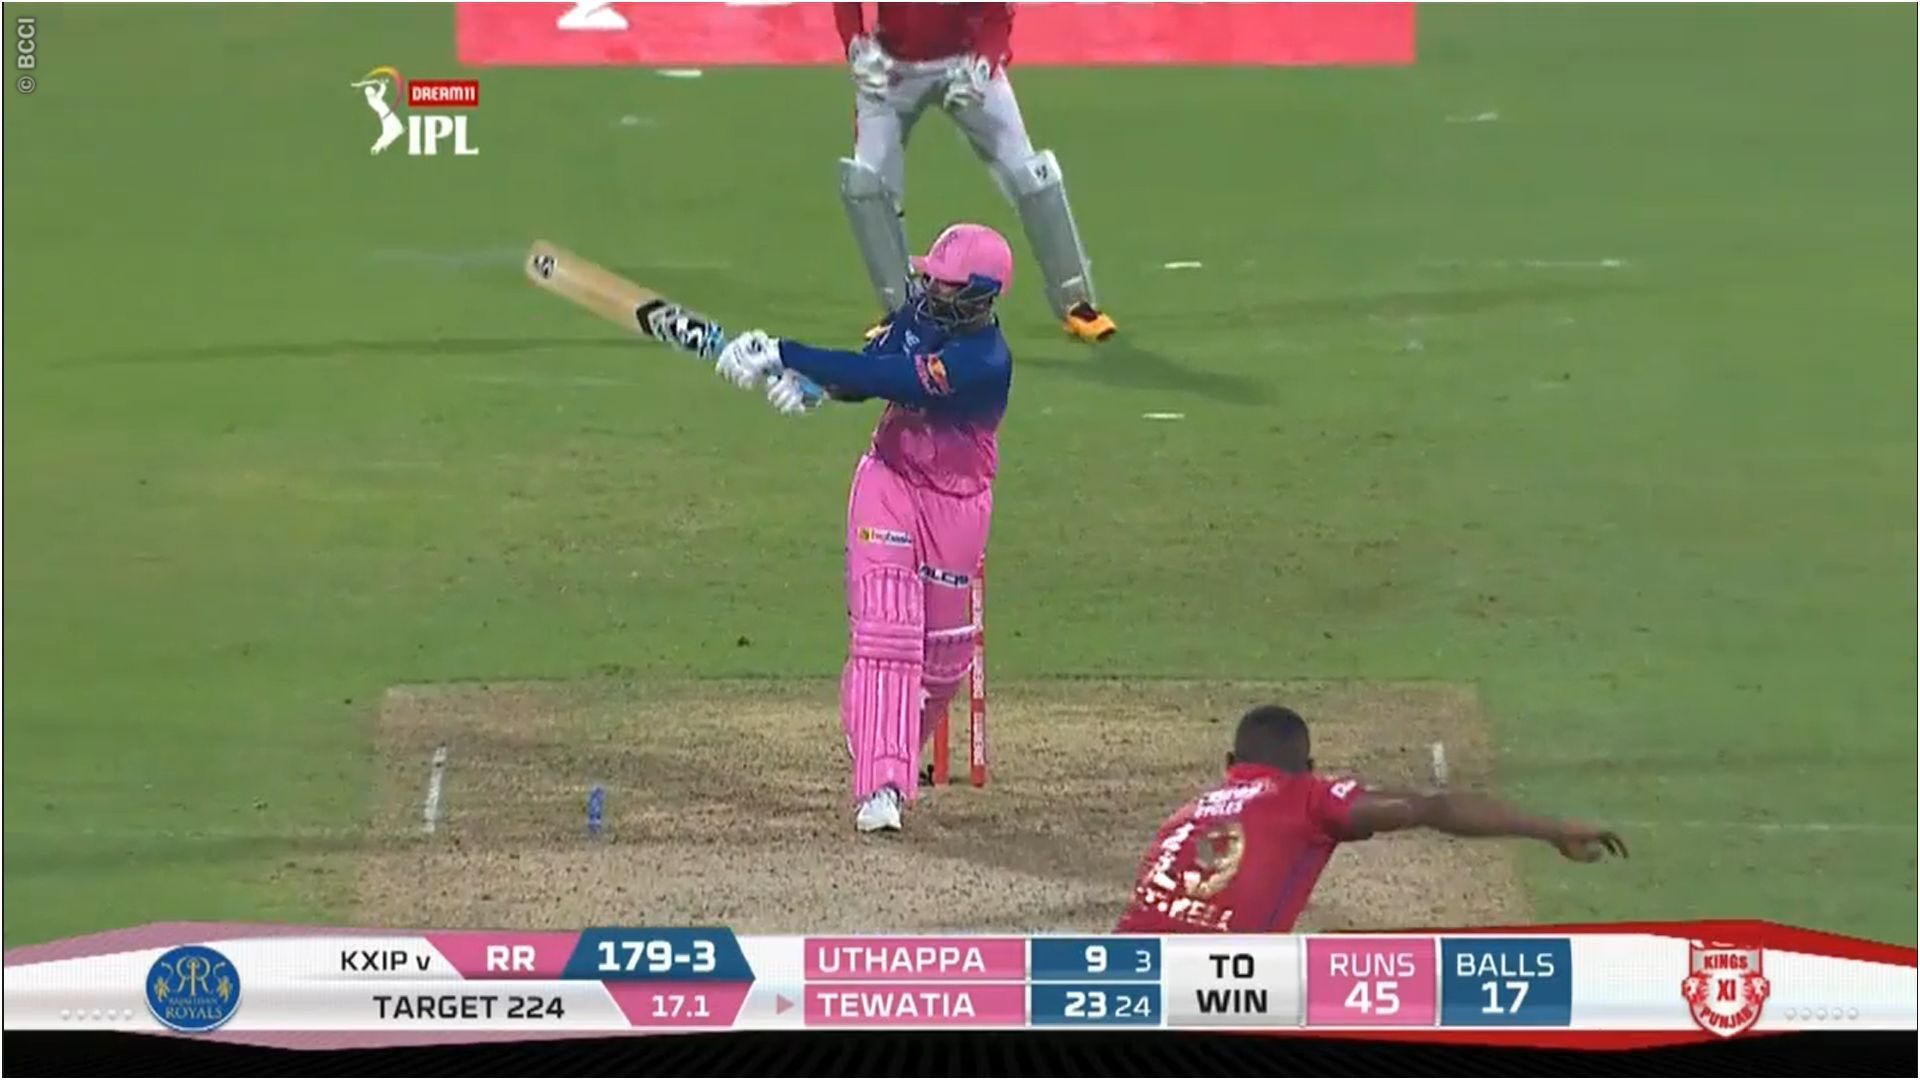 Rahul Tewatia in the course of hitting Cottrell for five sixes [iplt20.com]